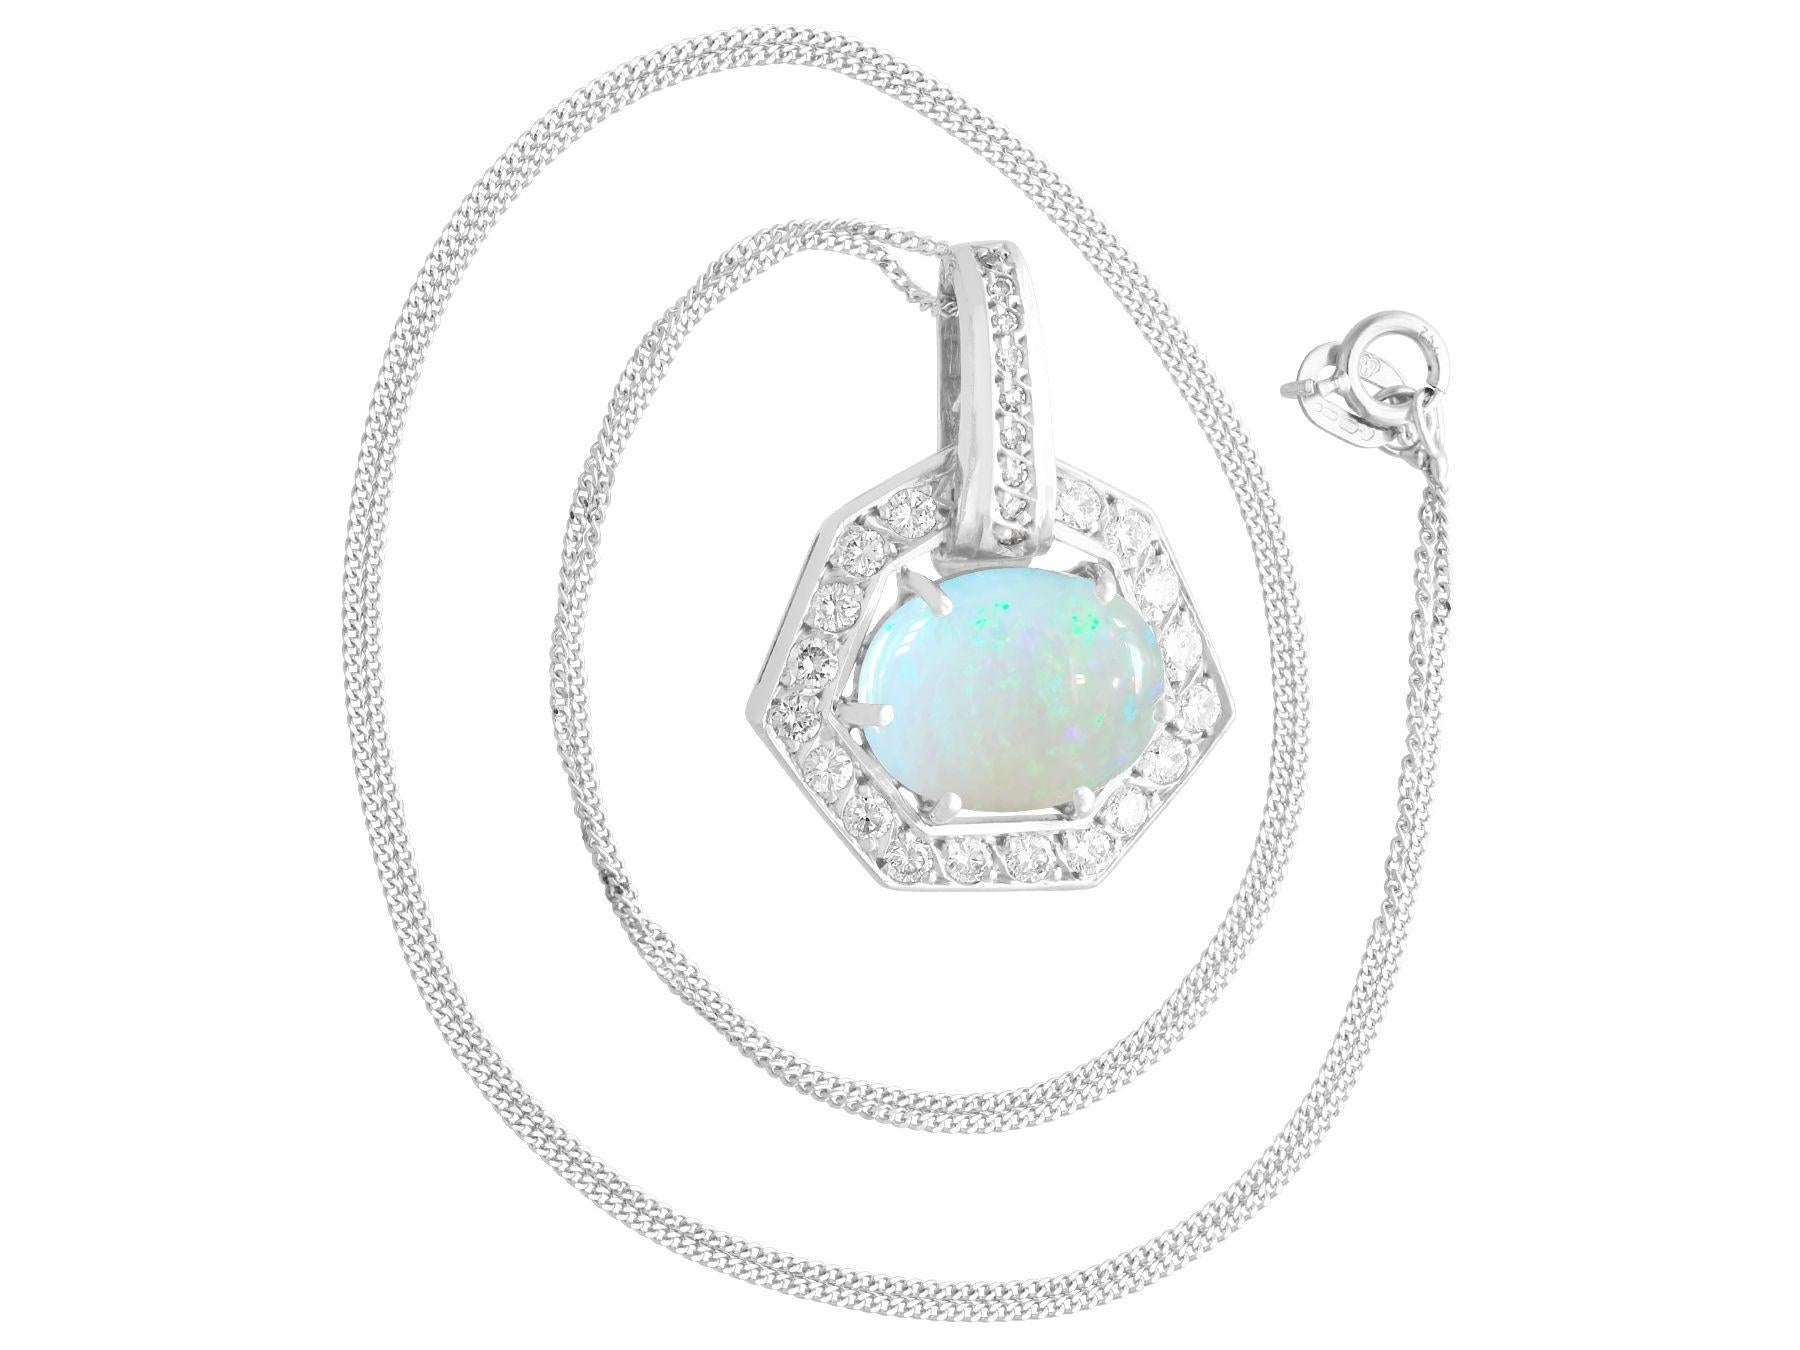 A fine and impressive 1.65 carat white opal and 0.68 carat diamond, 18 karat white gold pendant; part of our diverse jewelry collections

This fine and impressive cabochon cut pendant has been crafted in 18K white gold.

The pierced decorated,